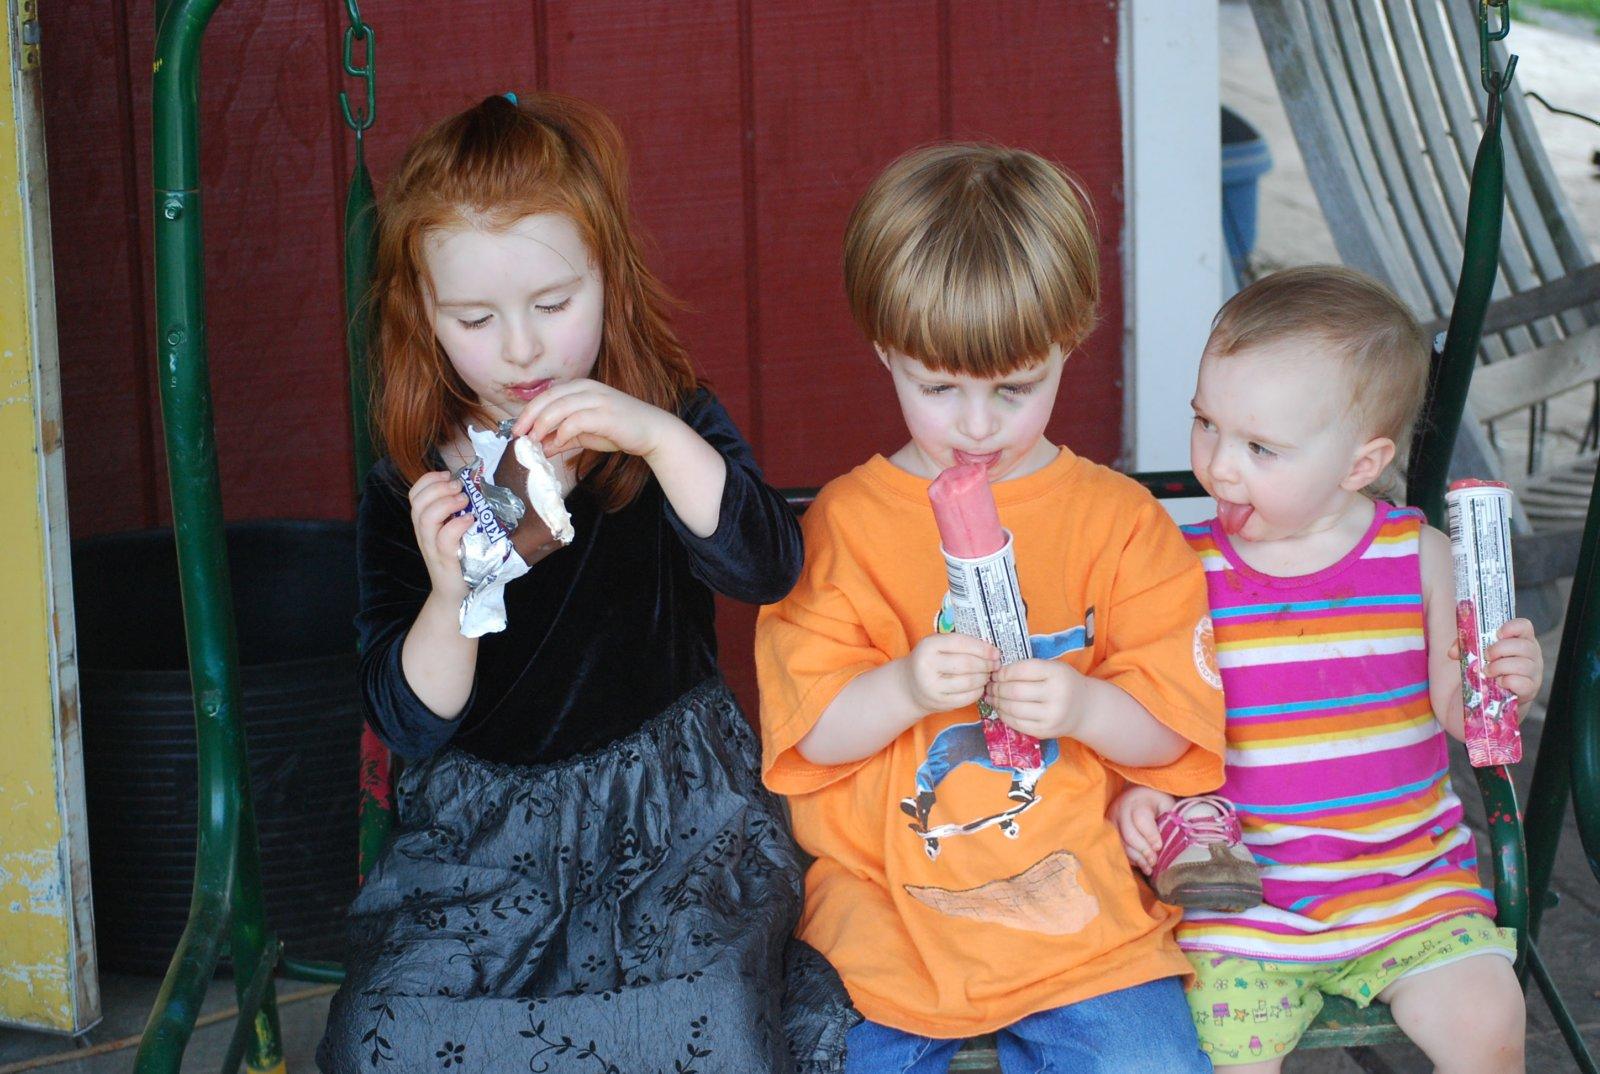 Our trips to the pumpkin patch in VA might include ice cream. (I love this picture.)